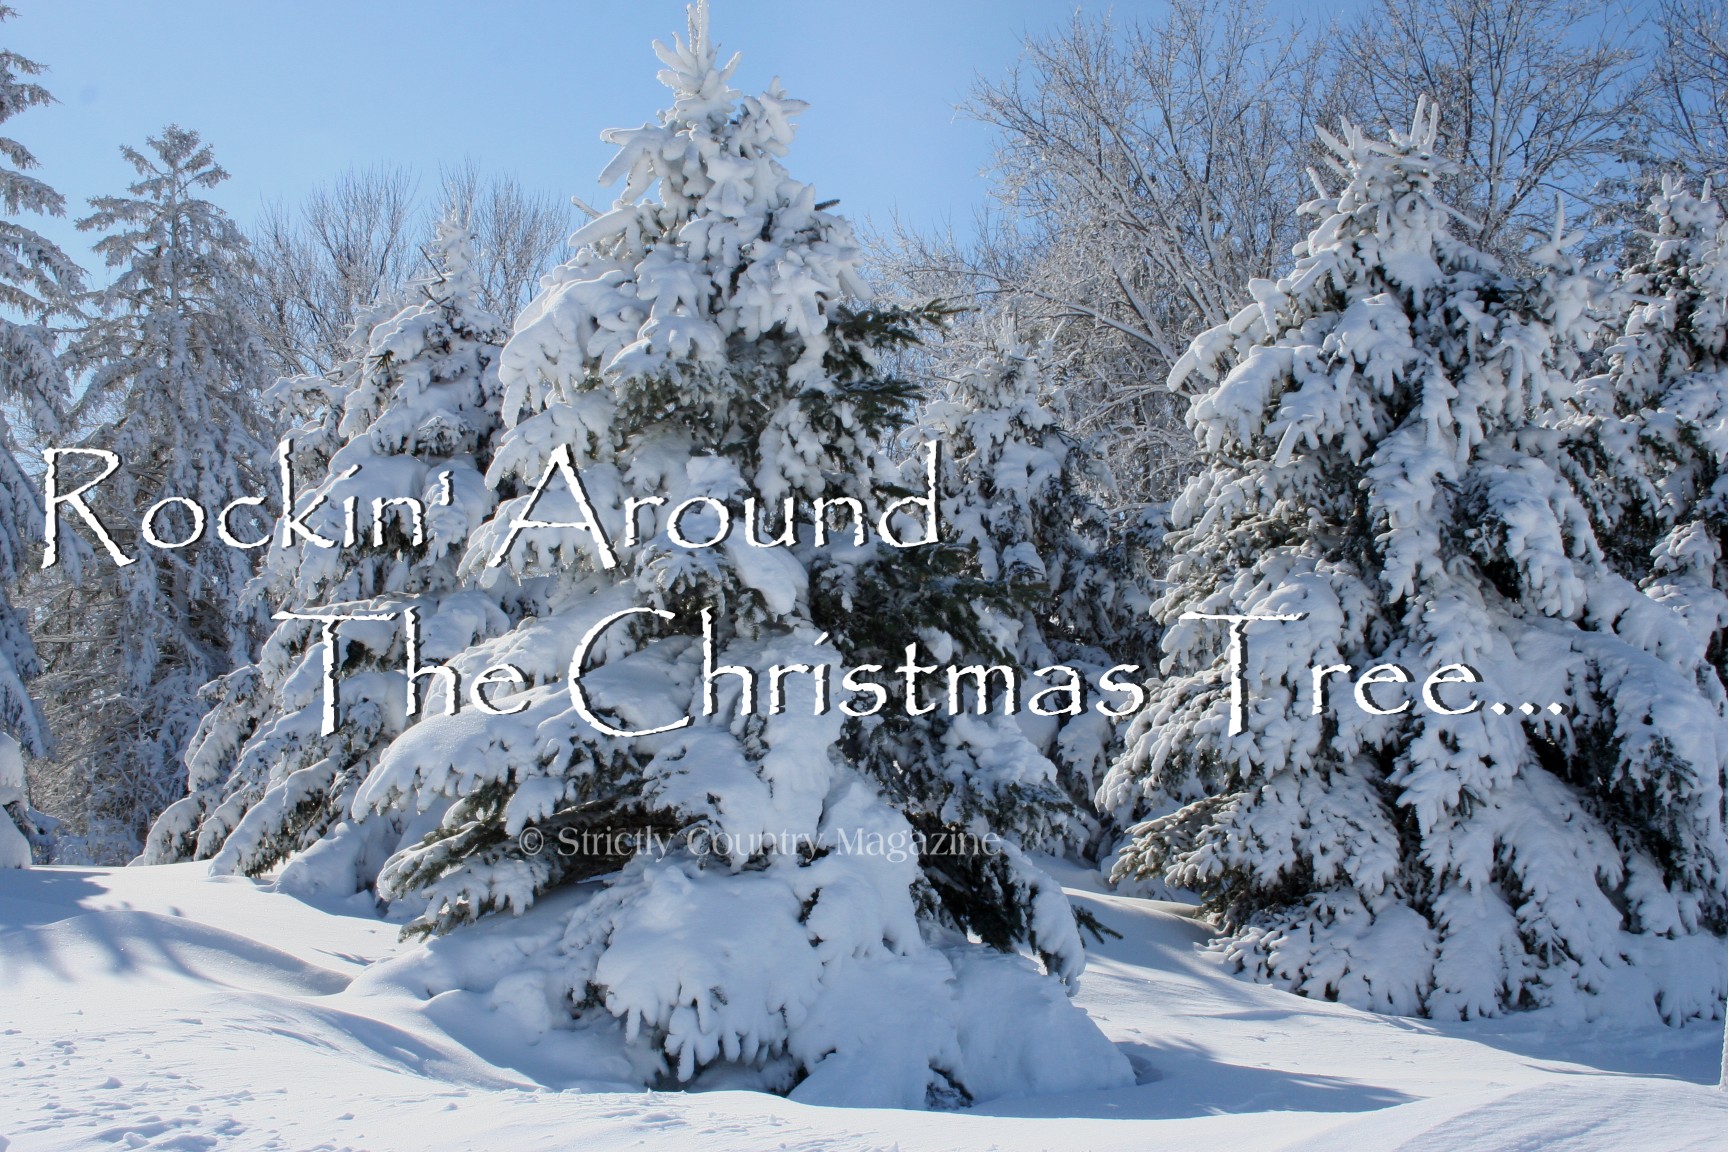 Strictly Country Magazine copyright Brenda Lee Rockin' Around The Christmas Tree title